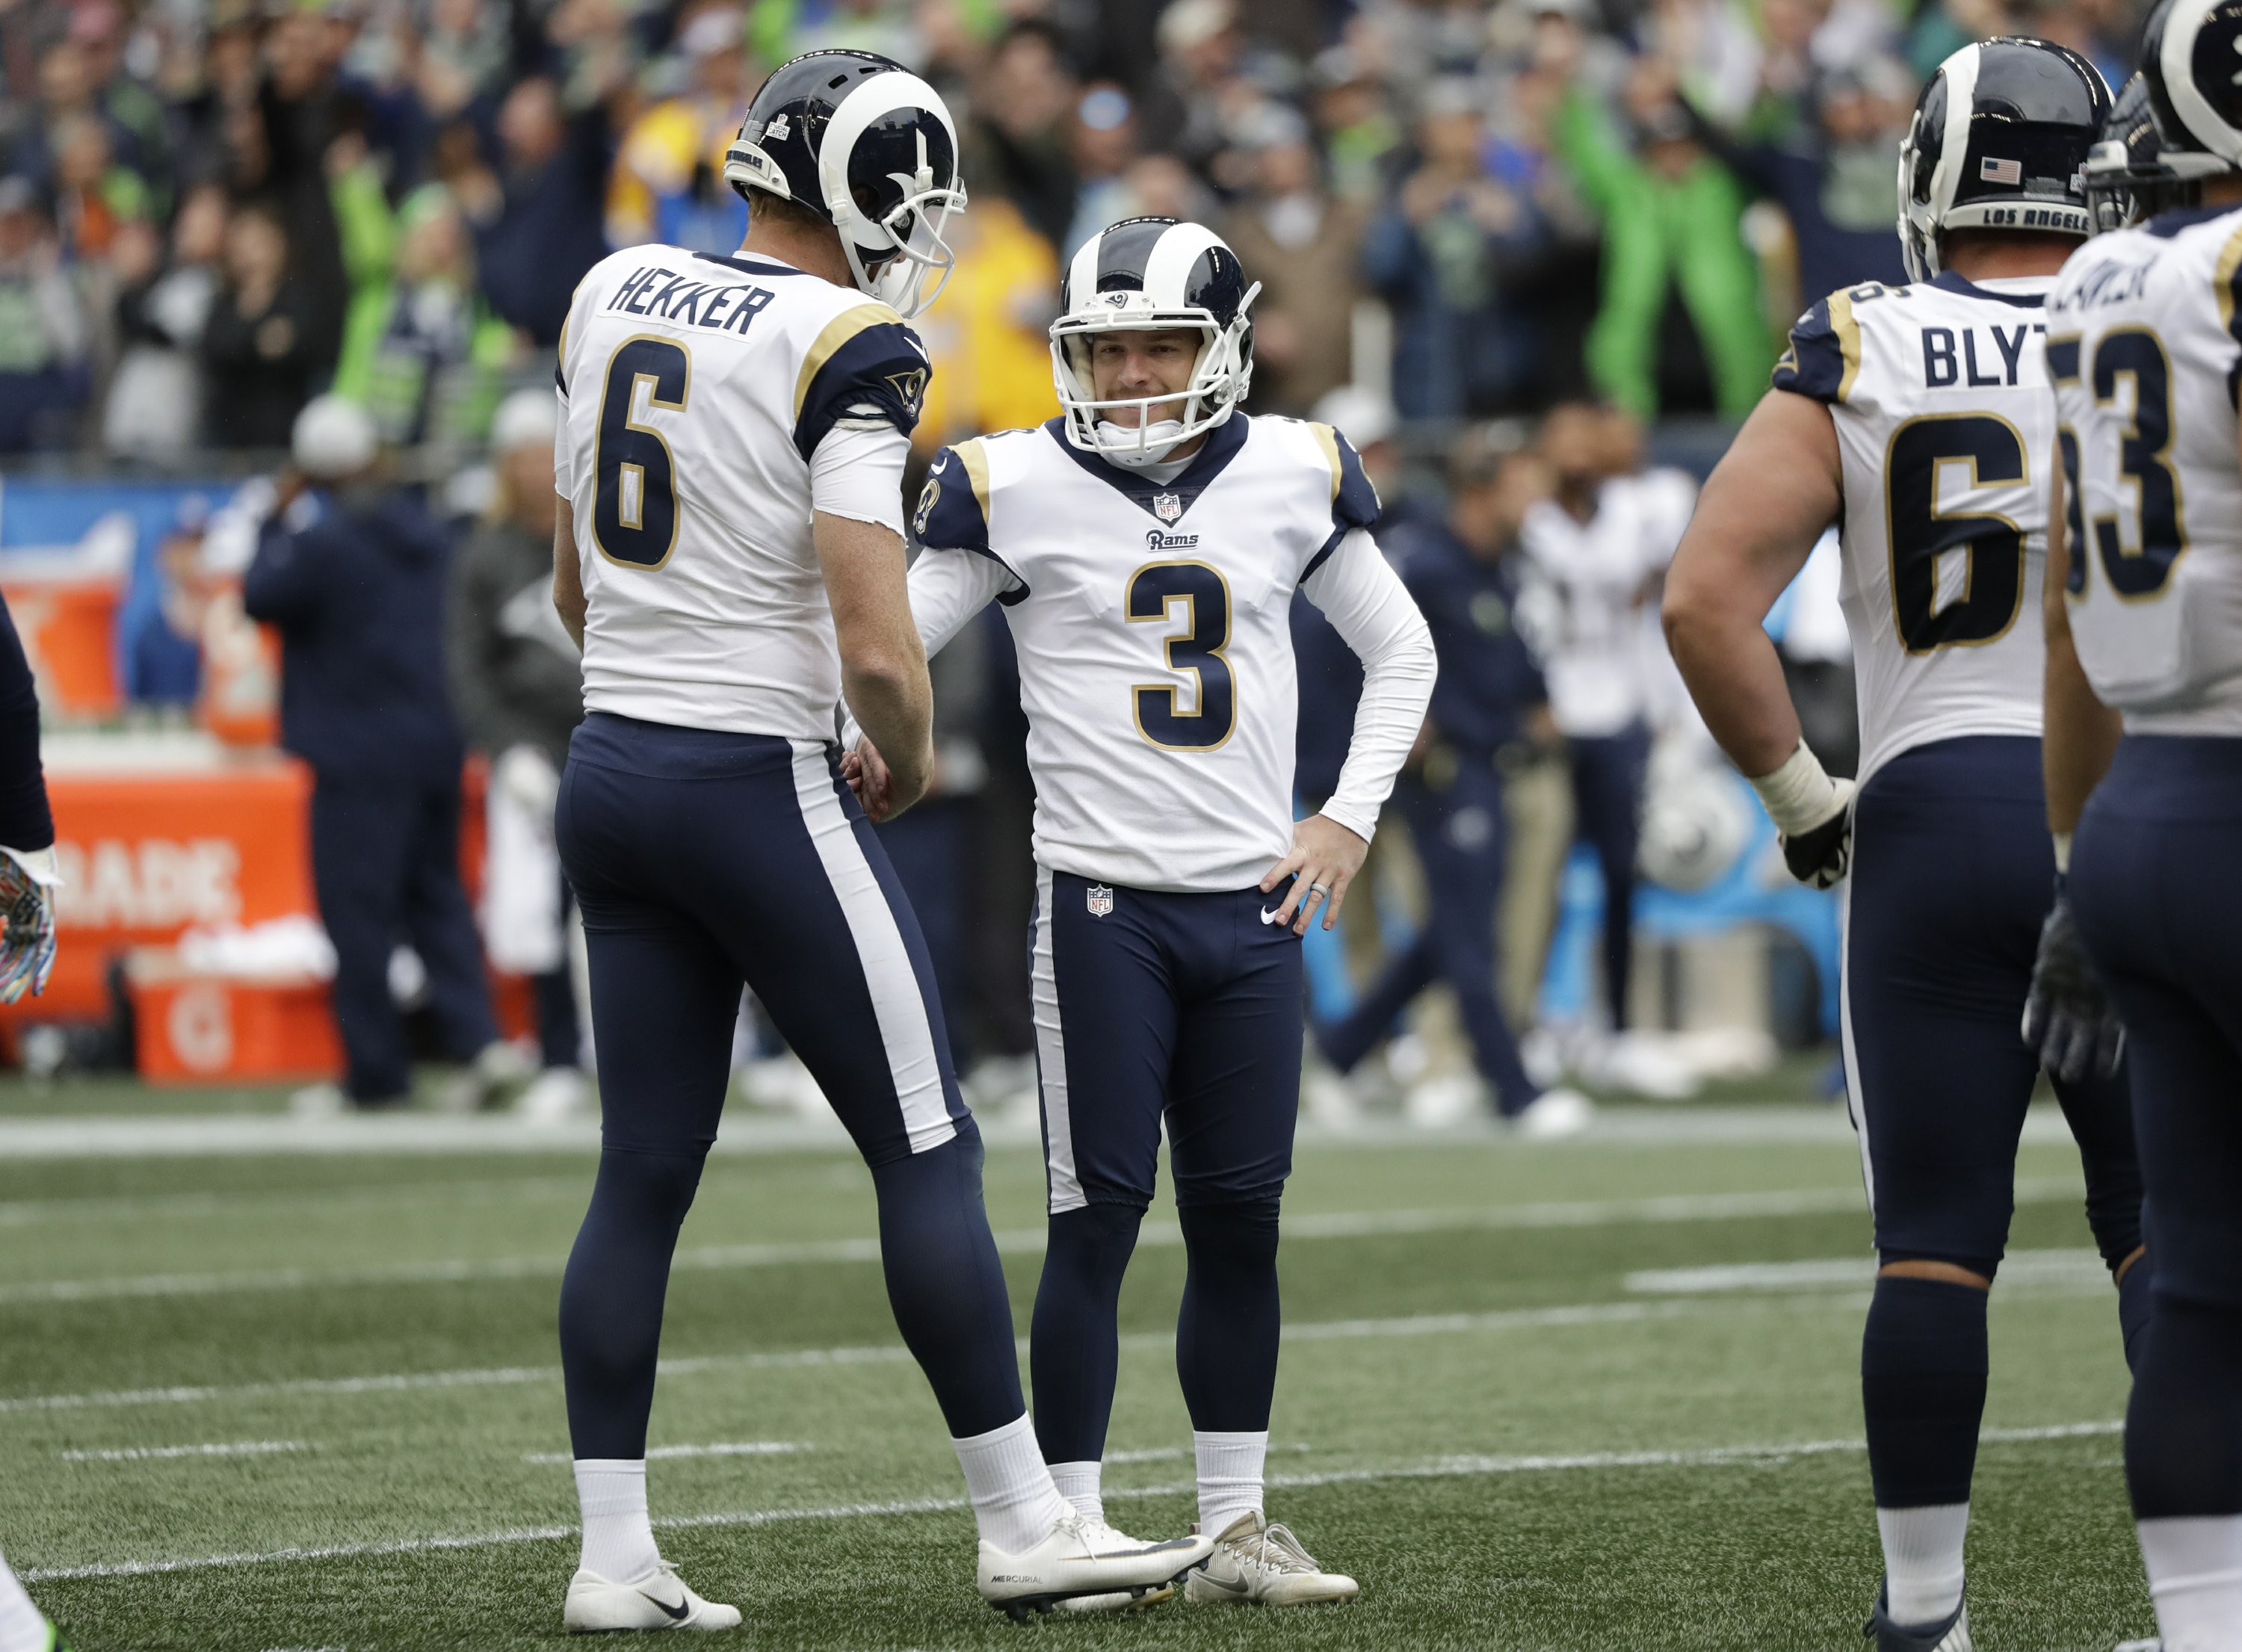 The Latest NFL kickers struggle with 4 missed extra points